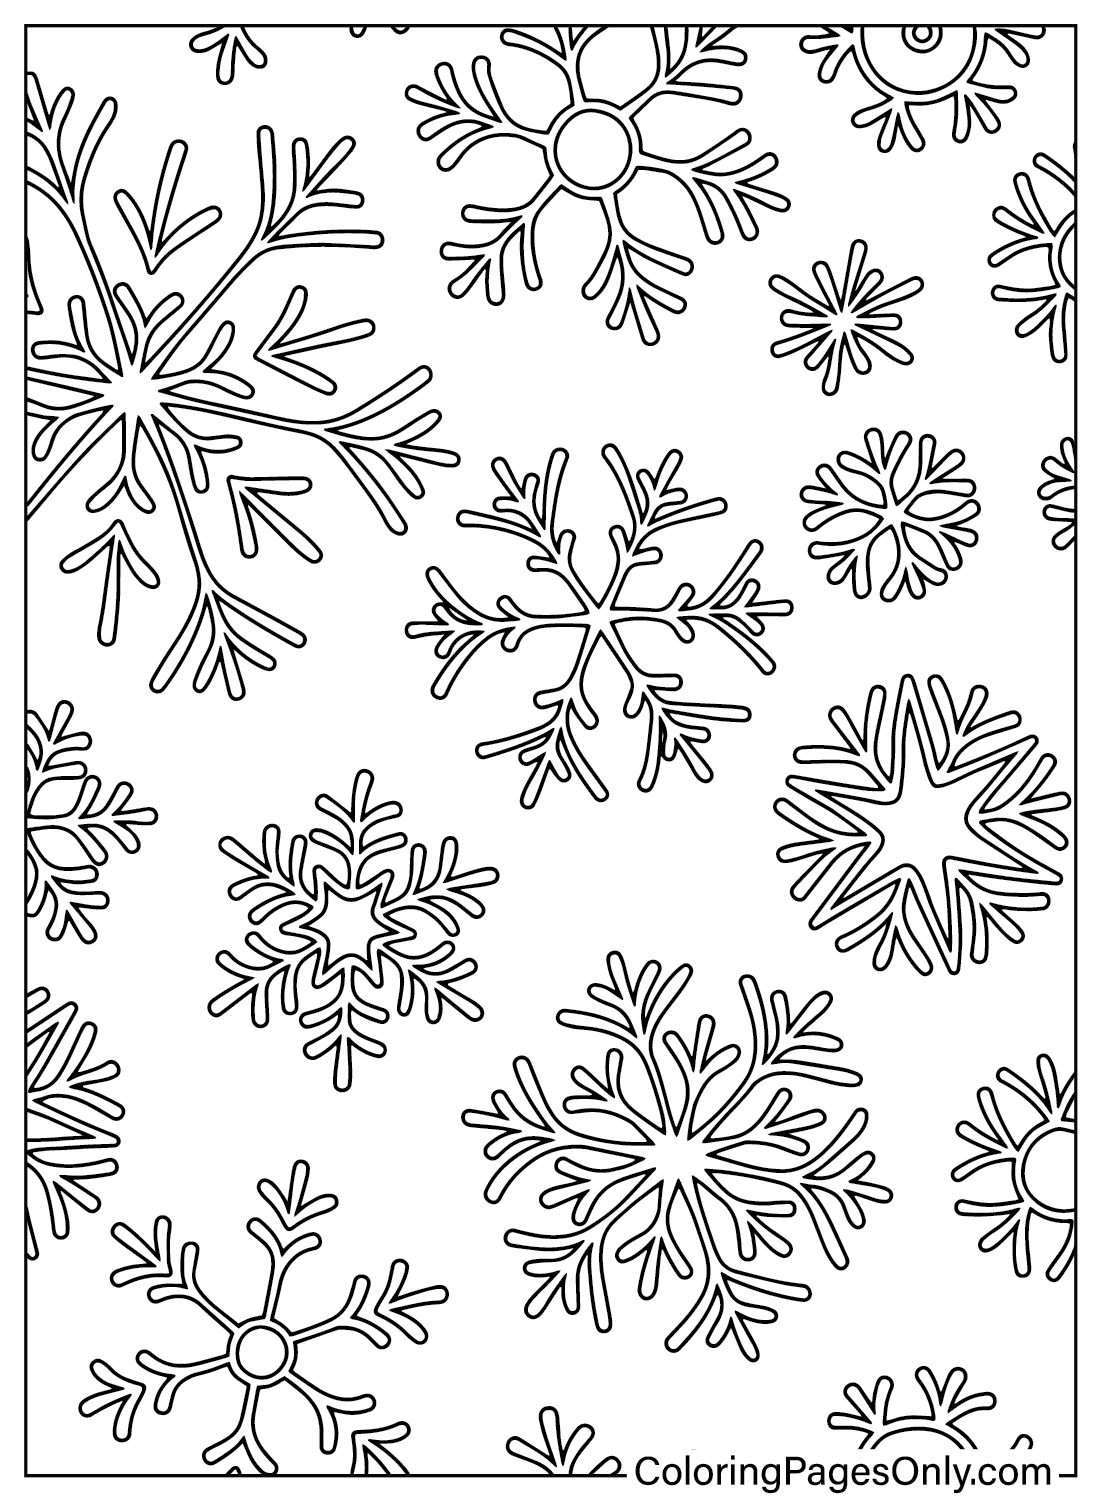 Free Coloring Pages of Snowflakes